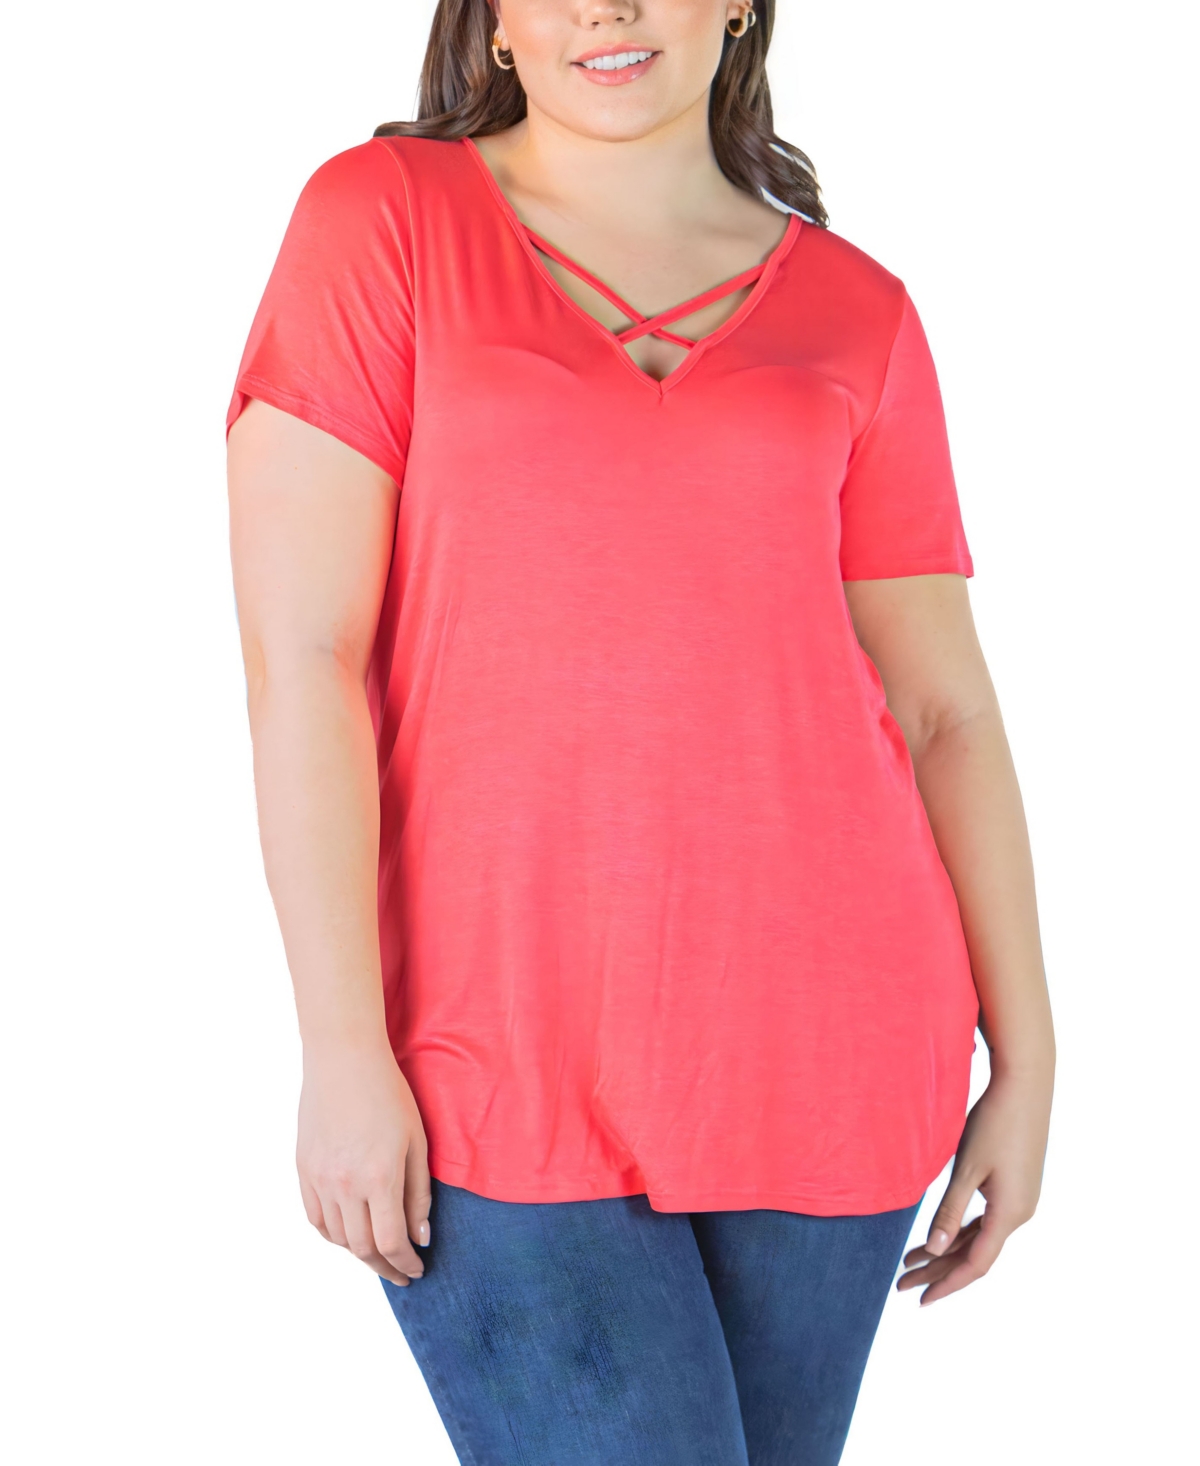 24seven Comfort Apparel Plus Size V-neck T-shirt Tunic Top In Coral